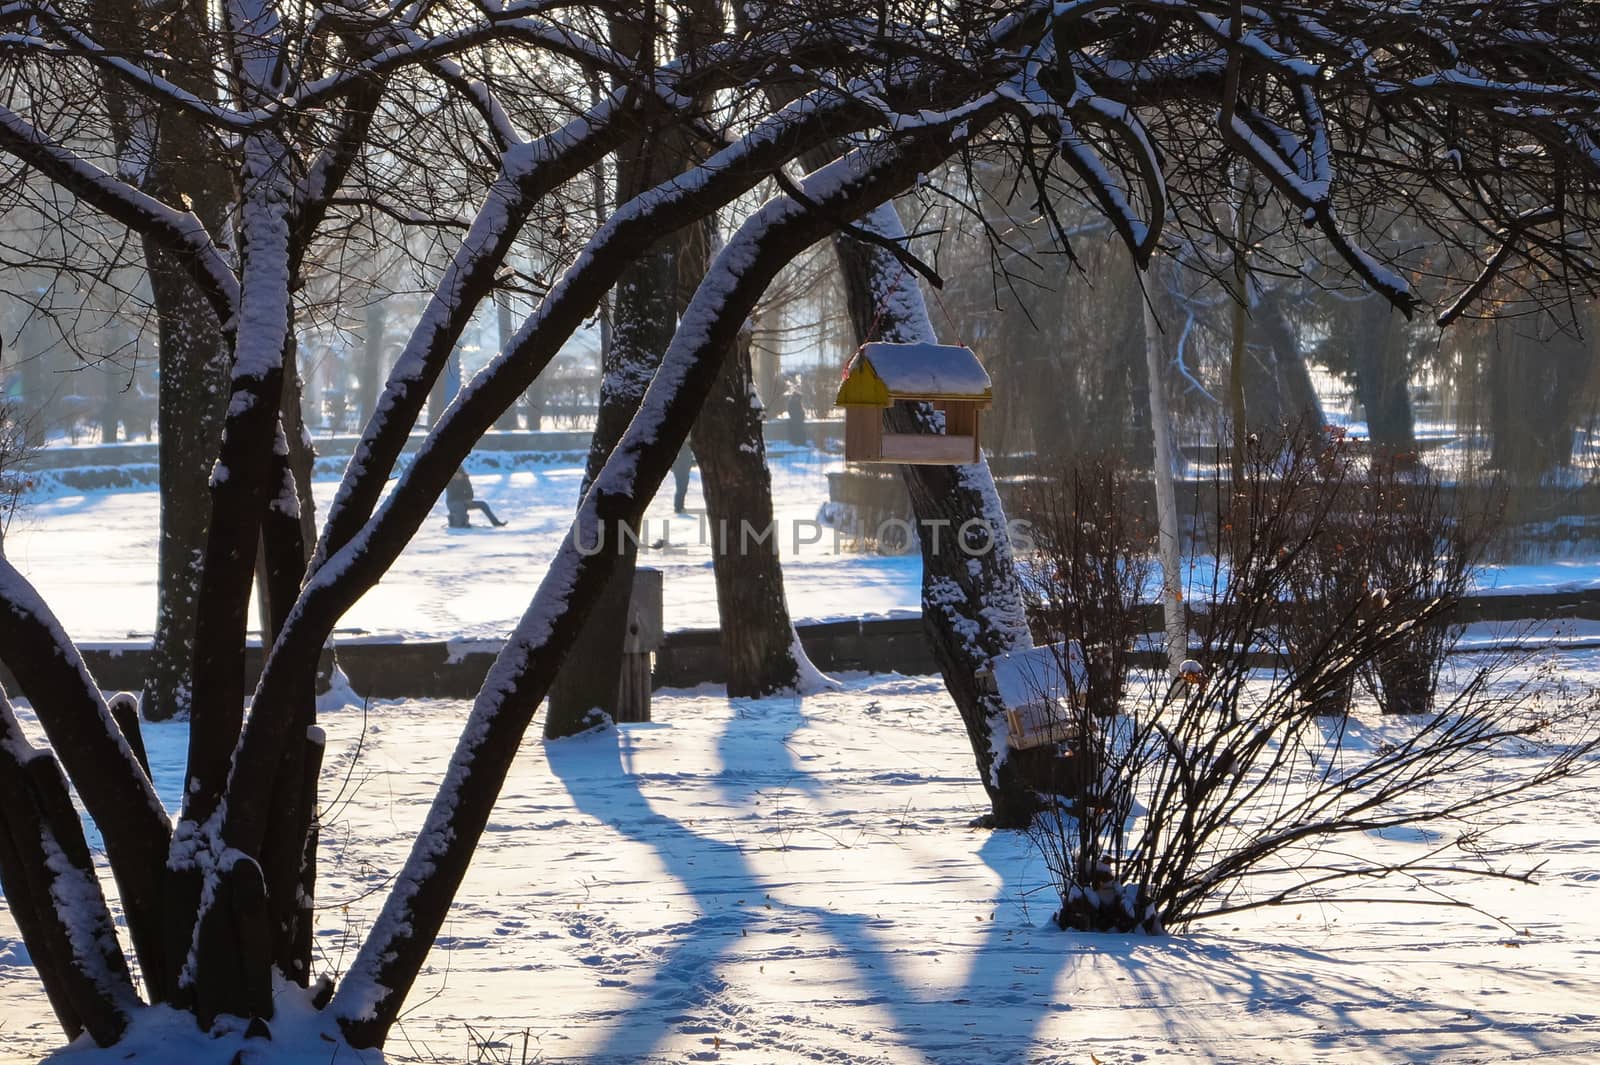 the bird feeder on the tree in the Park winter landscape